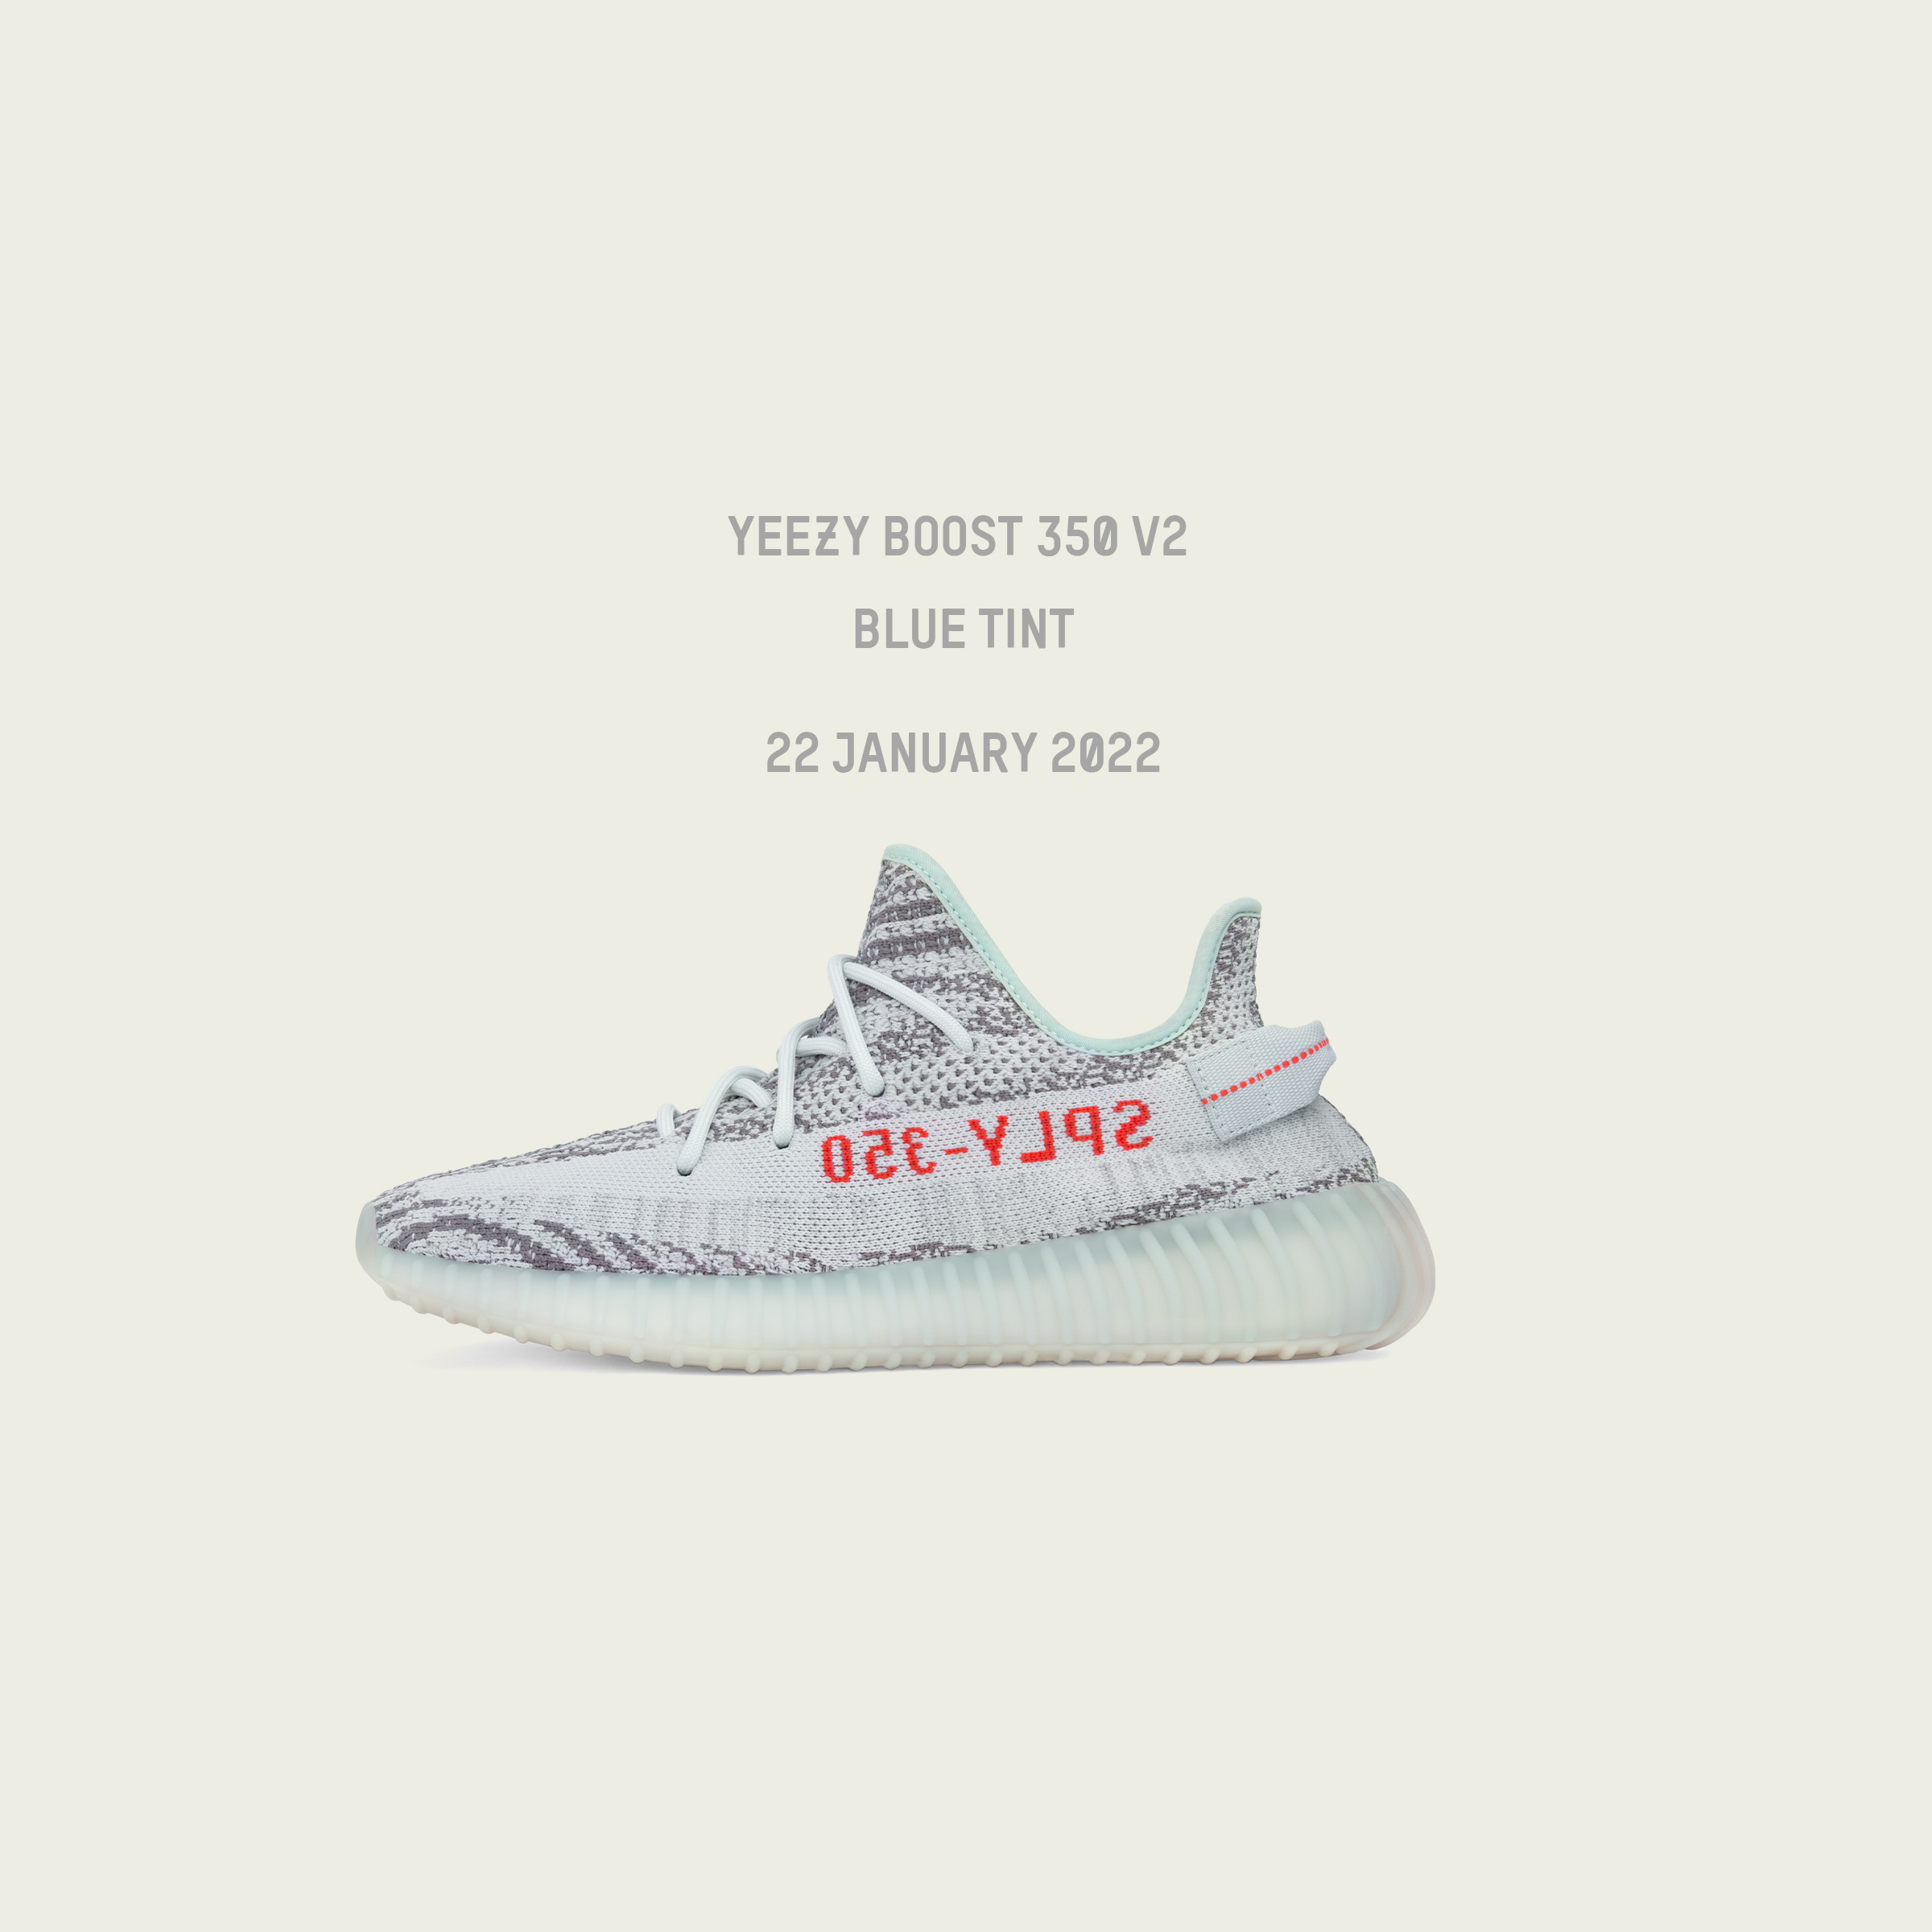 Champs Sports on Twitter: "THE YEEZY 350 V2 "BLUE RELEASES TOMORROW, JANUARY 22. RESERVATIONS ARE NOW OPEN VIA THE CHAMPS SPORTS https://t.co/xEJ1osQyW3" / Twitter